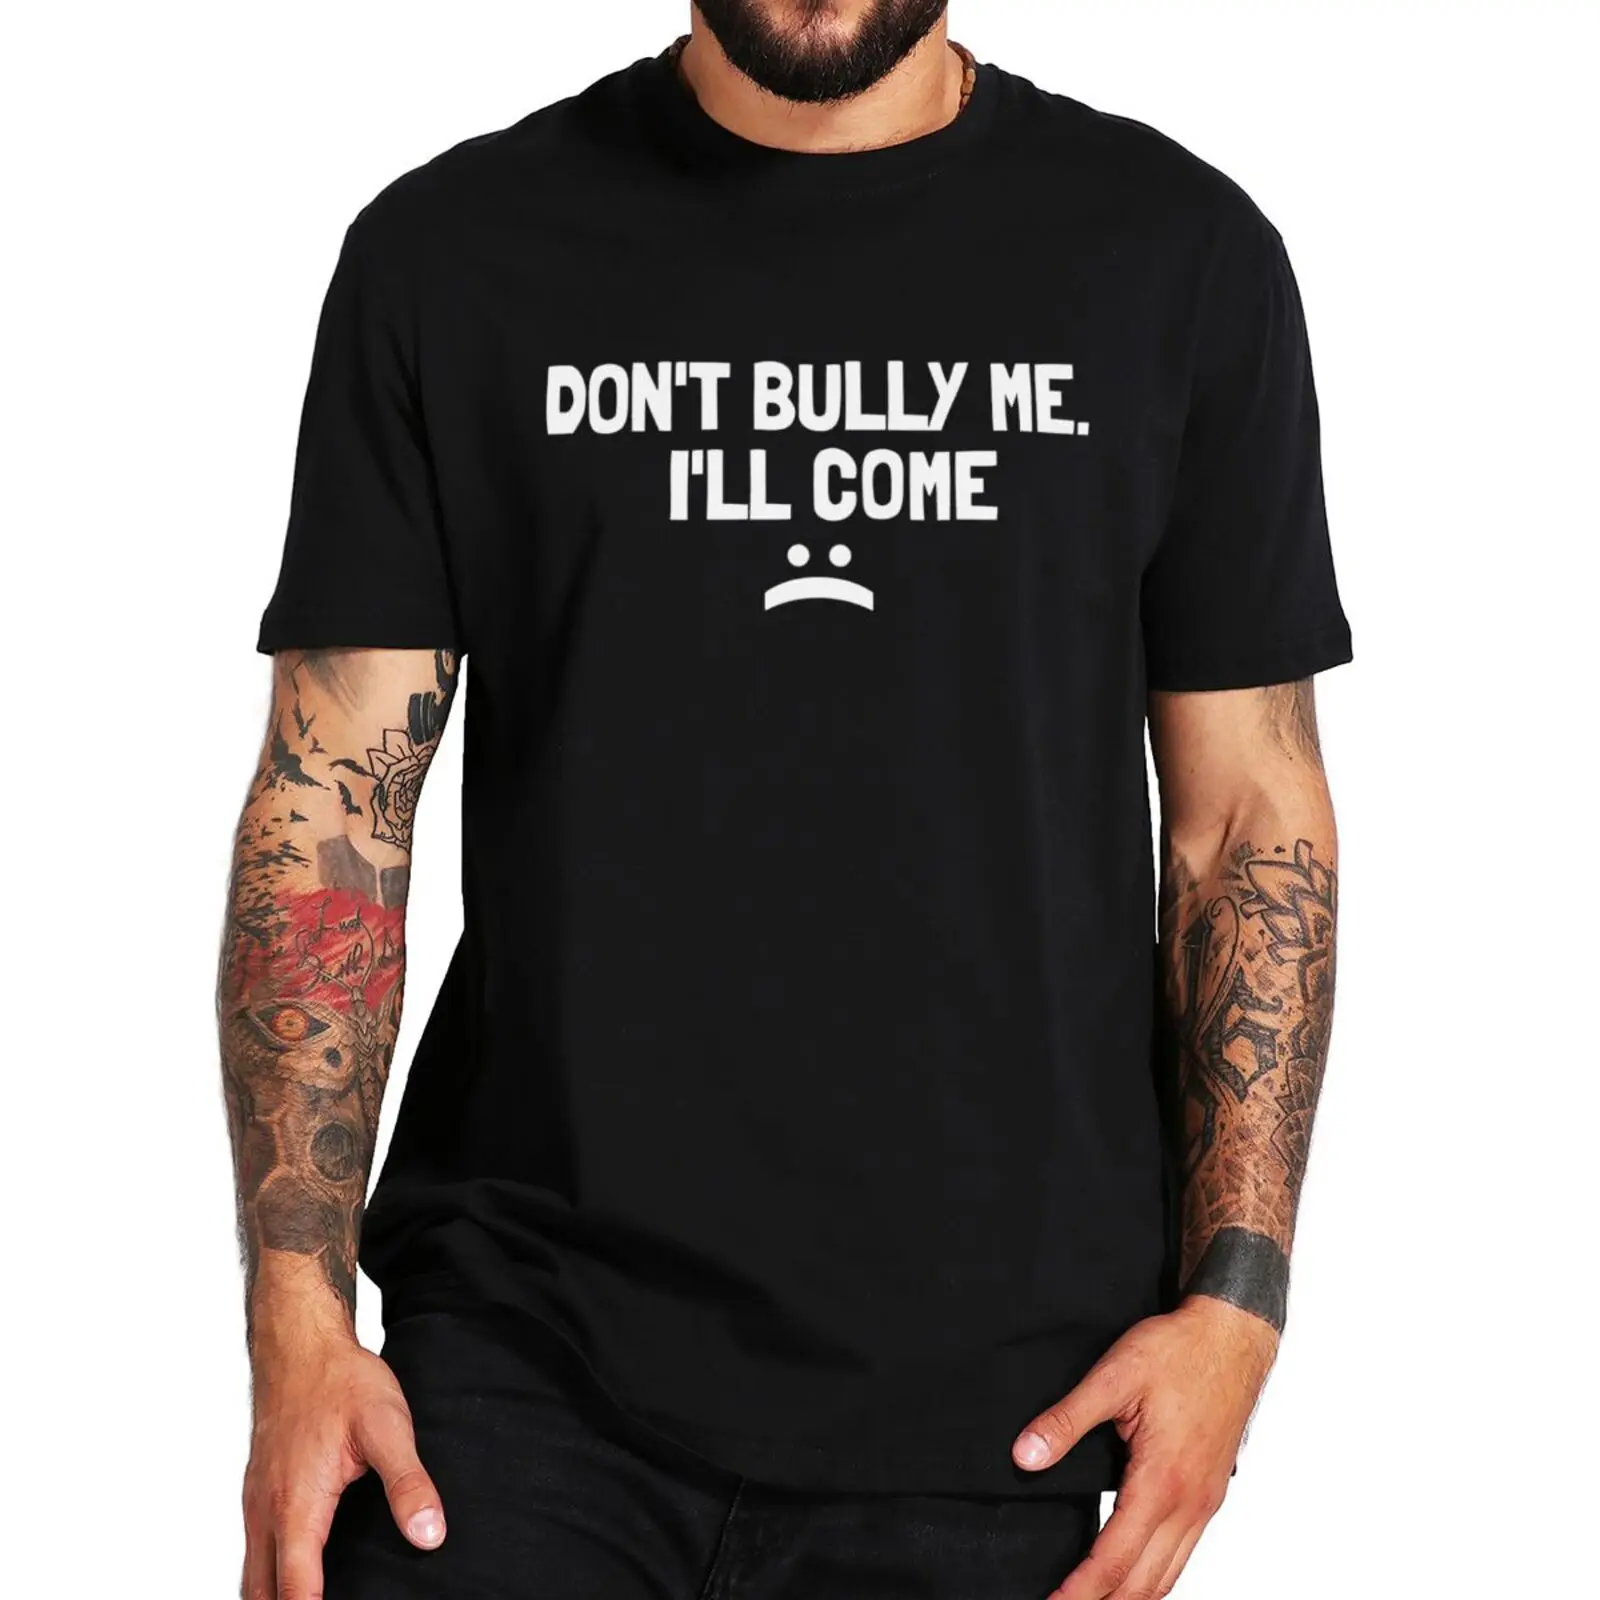 

Don't Bully Me T Shirt Funny Quote I Will Come Casual Tee Tops Short Sleeve 100% Cotton T-Shirt